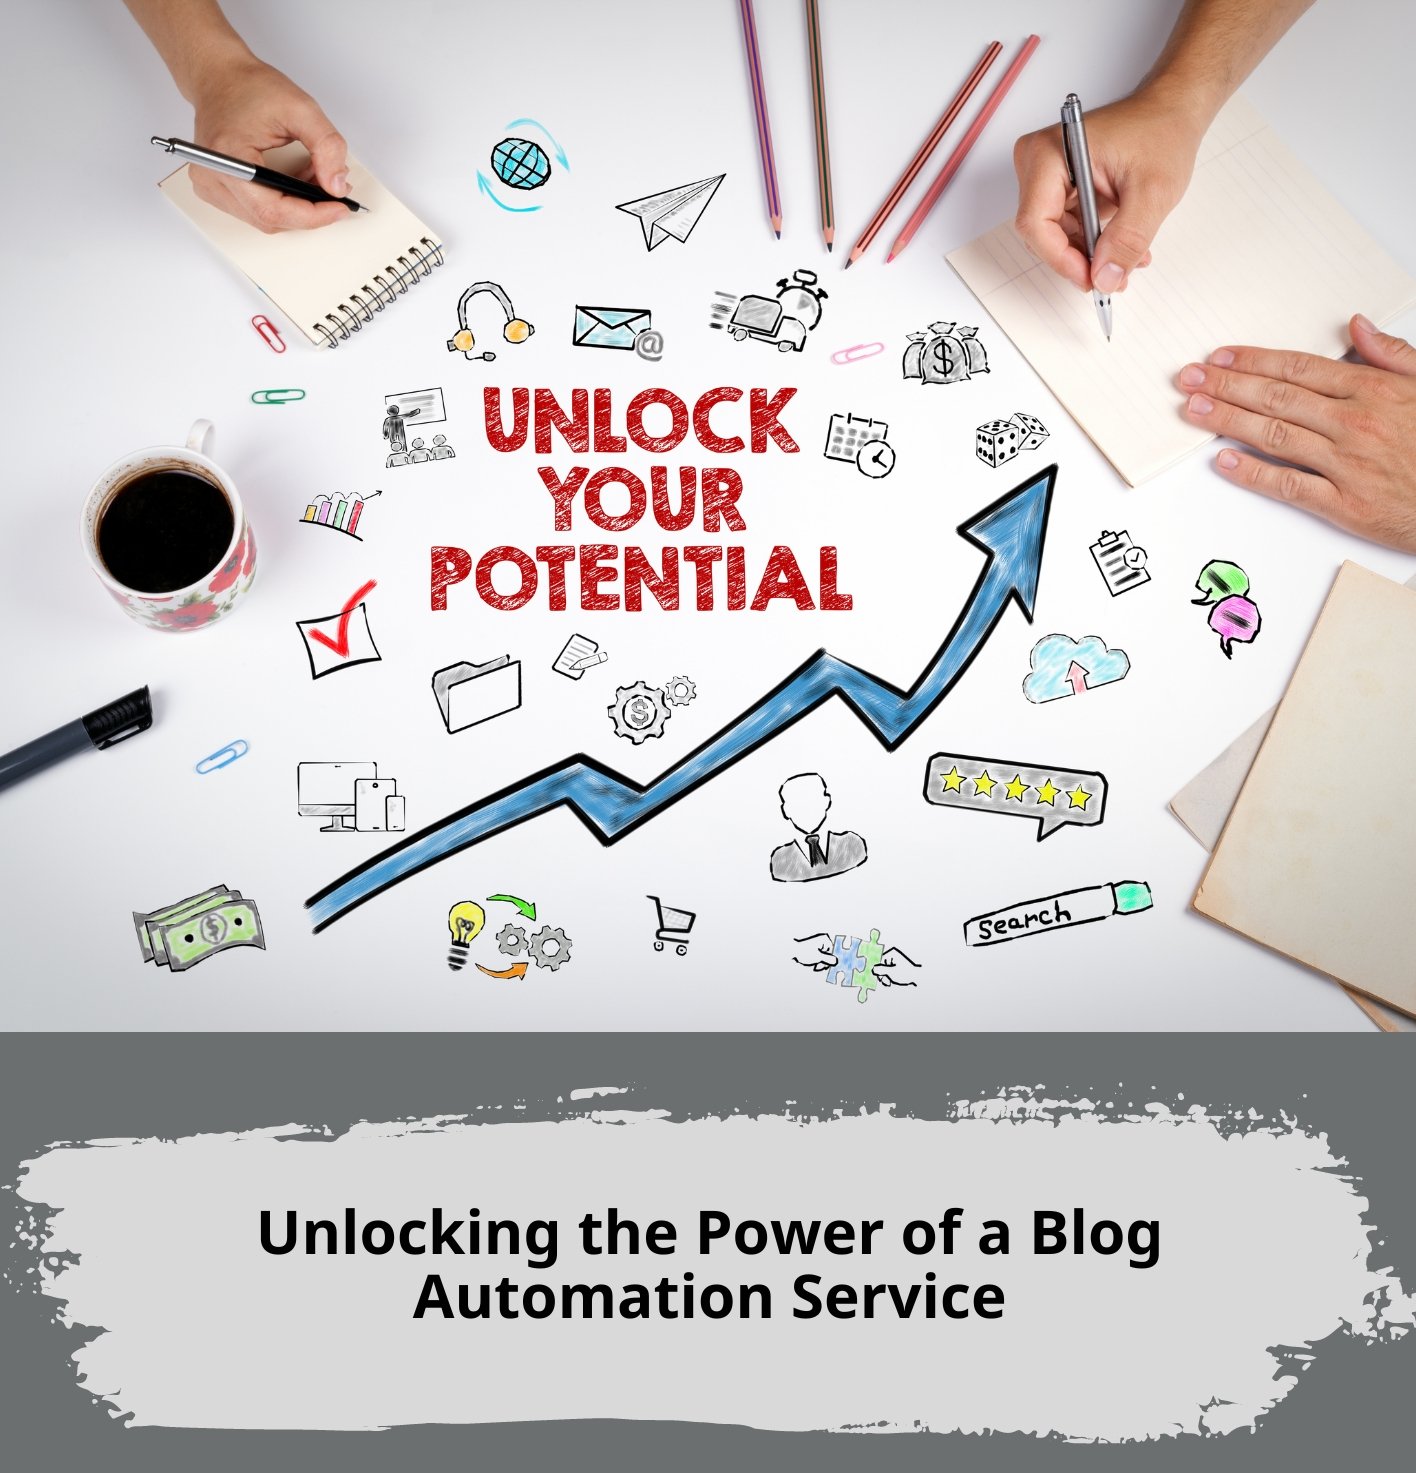 Unlocking the Power of a Blog Automation Service